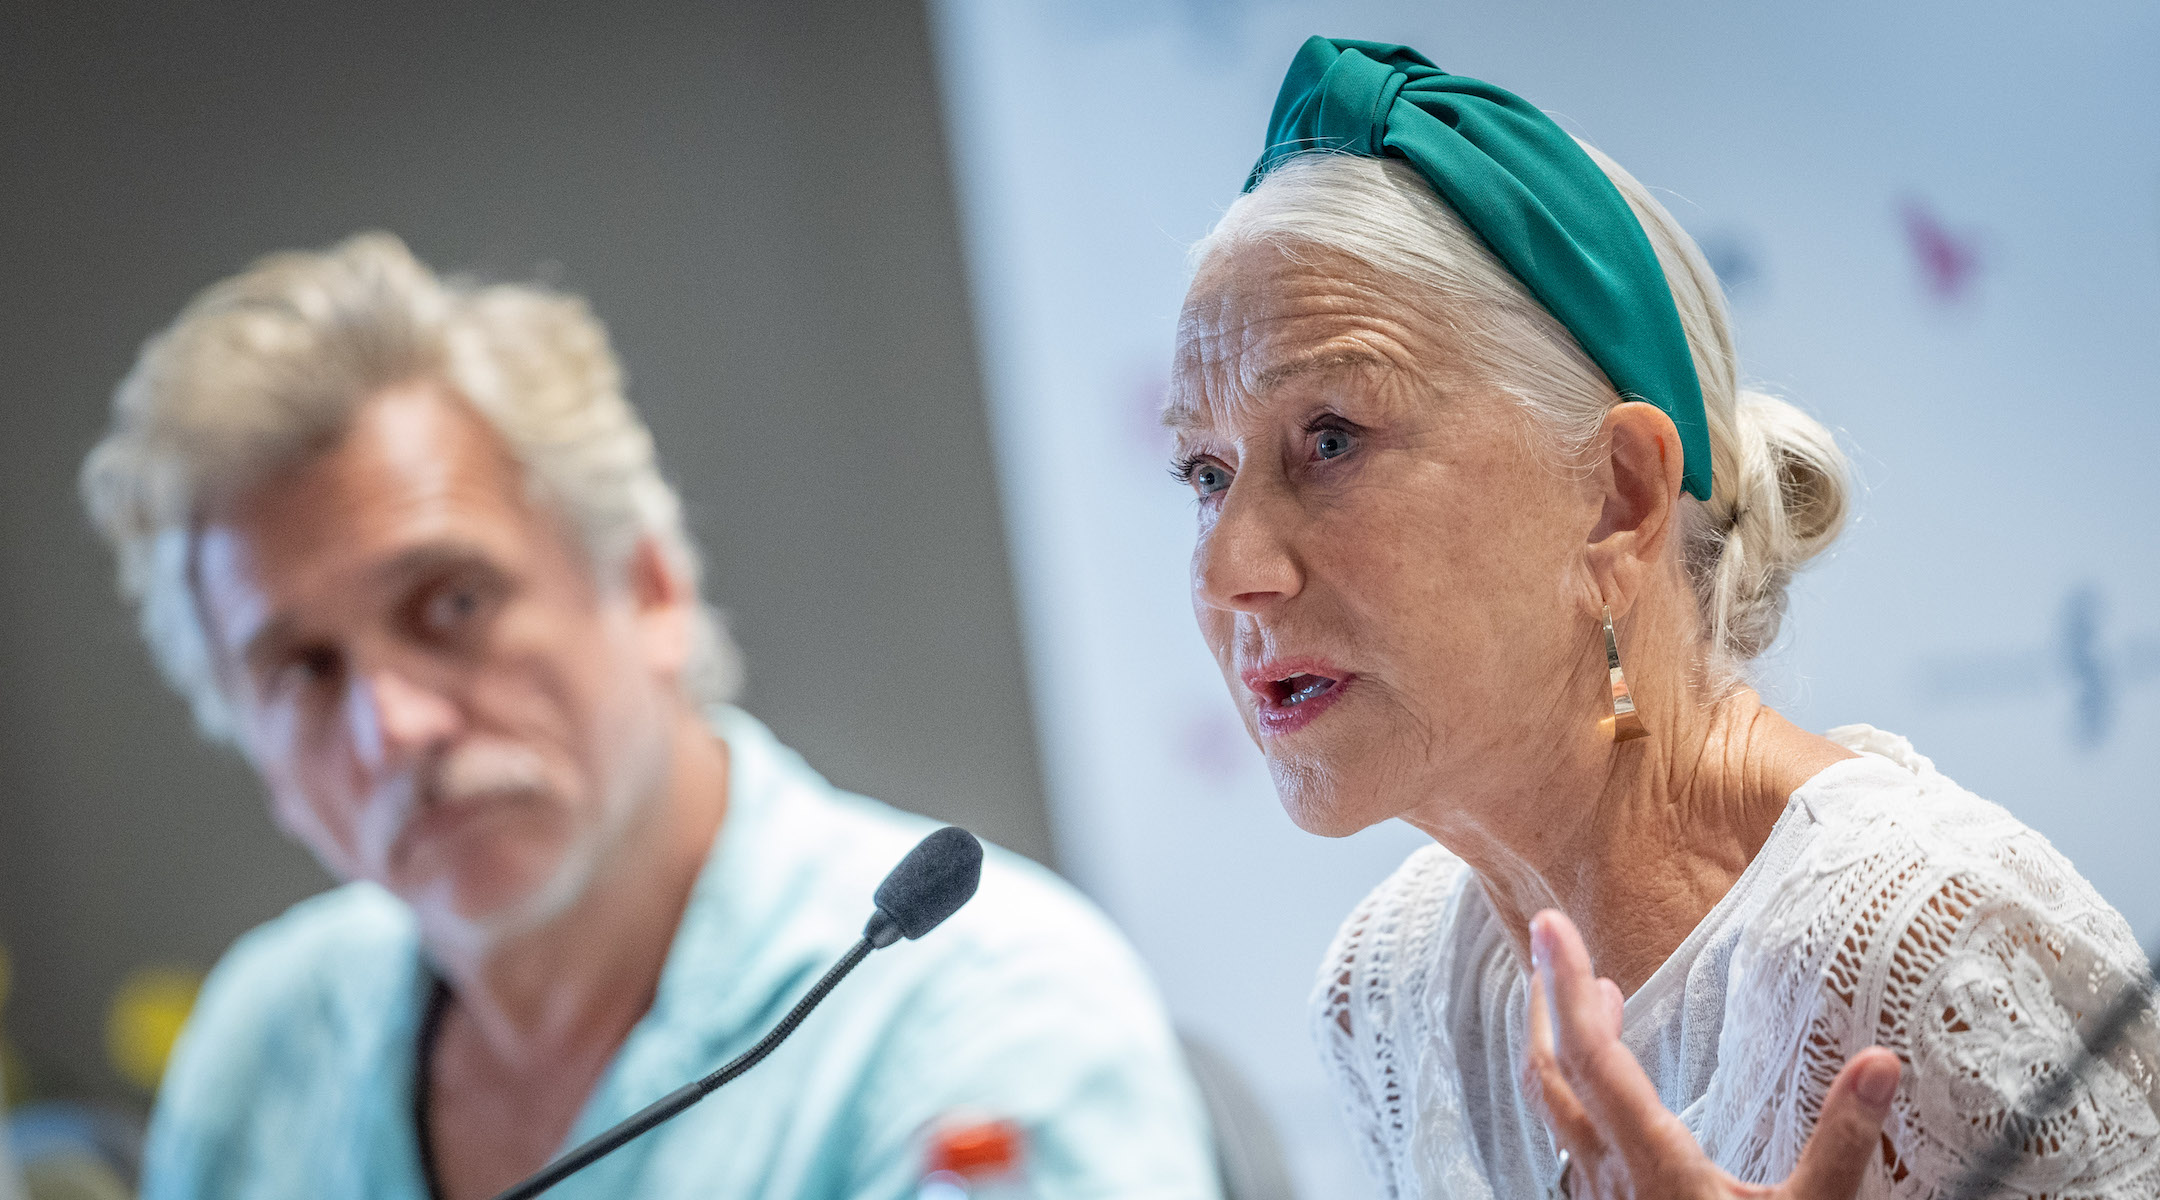 Helen Mirren and co-star Lior Ashkenazi (left) attend a press conference ahead of the Israeli premiere of the movie "Golda" in Jerusalem on July 13, 2023. (Yonatan Sindel/Flash90)